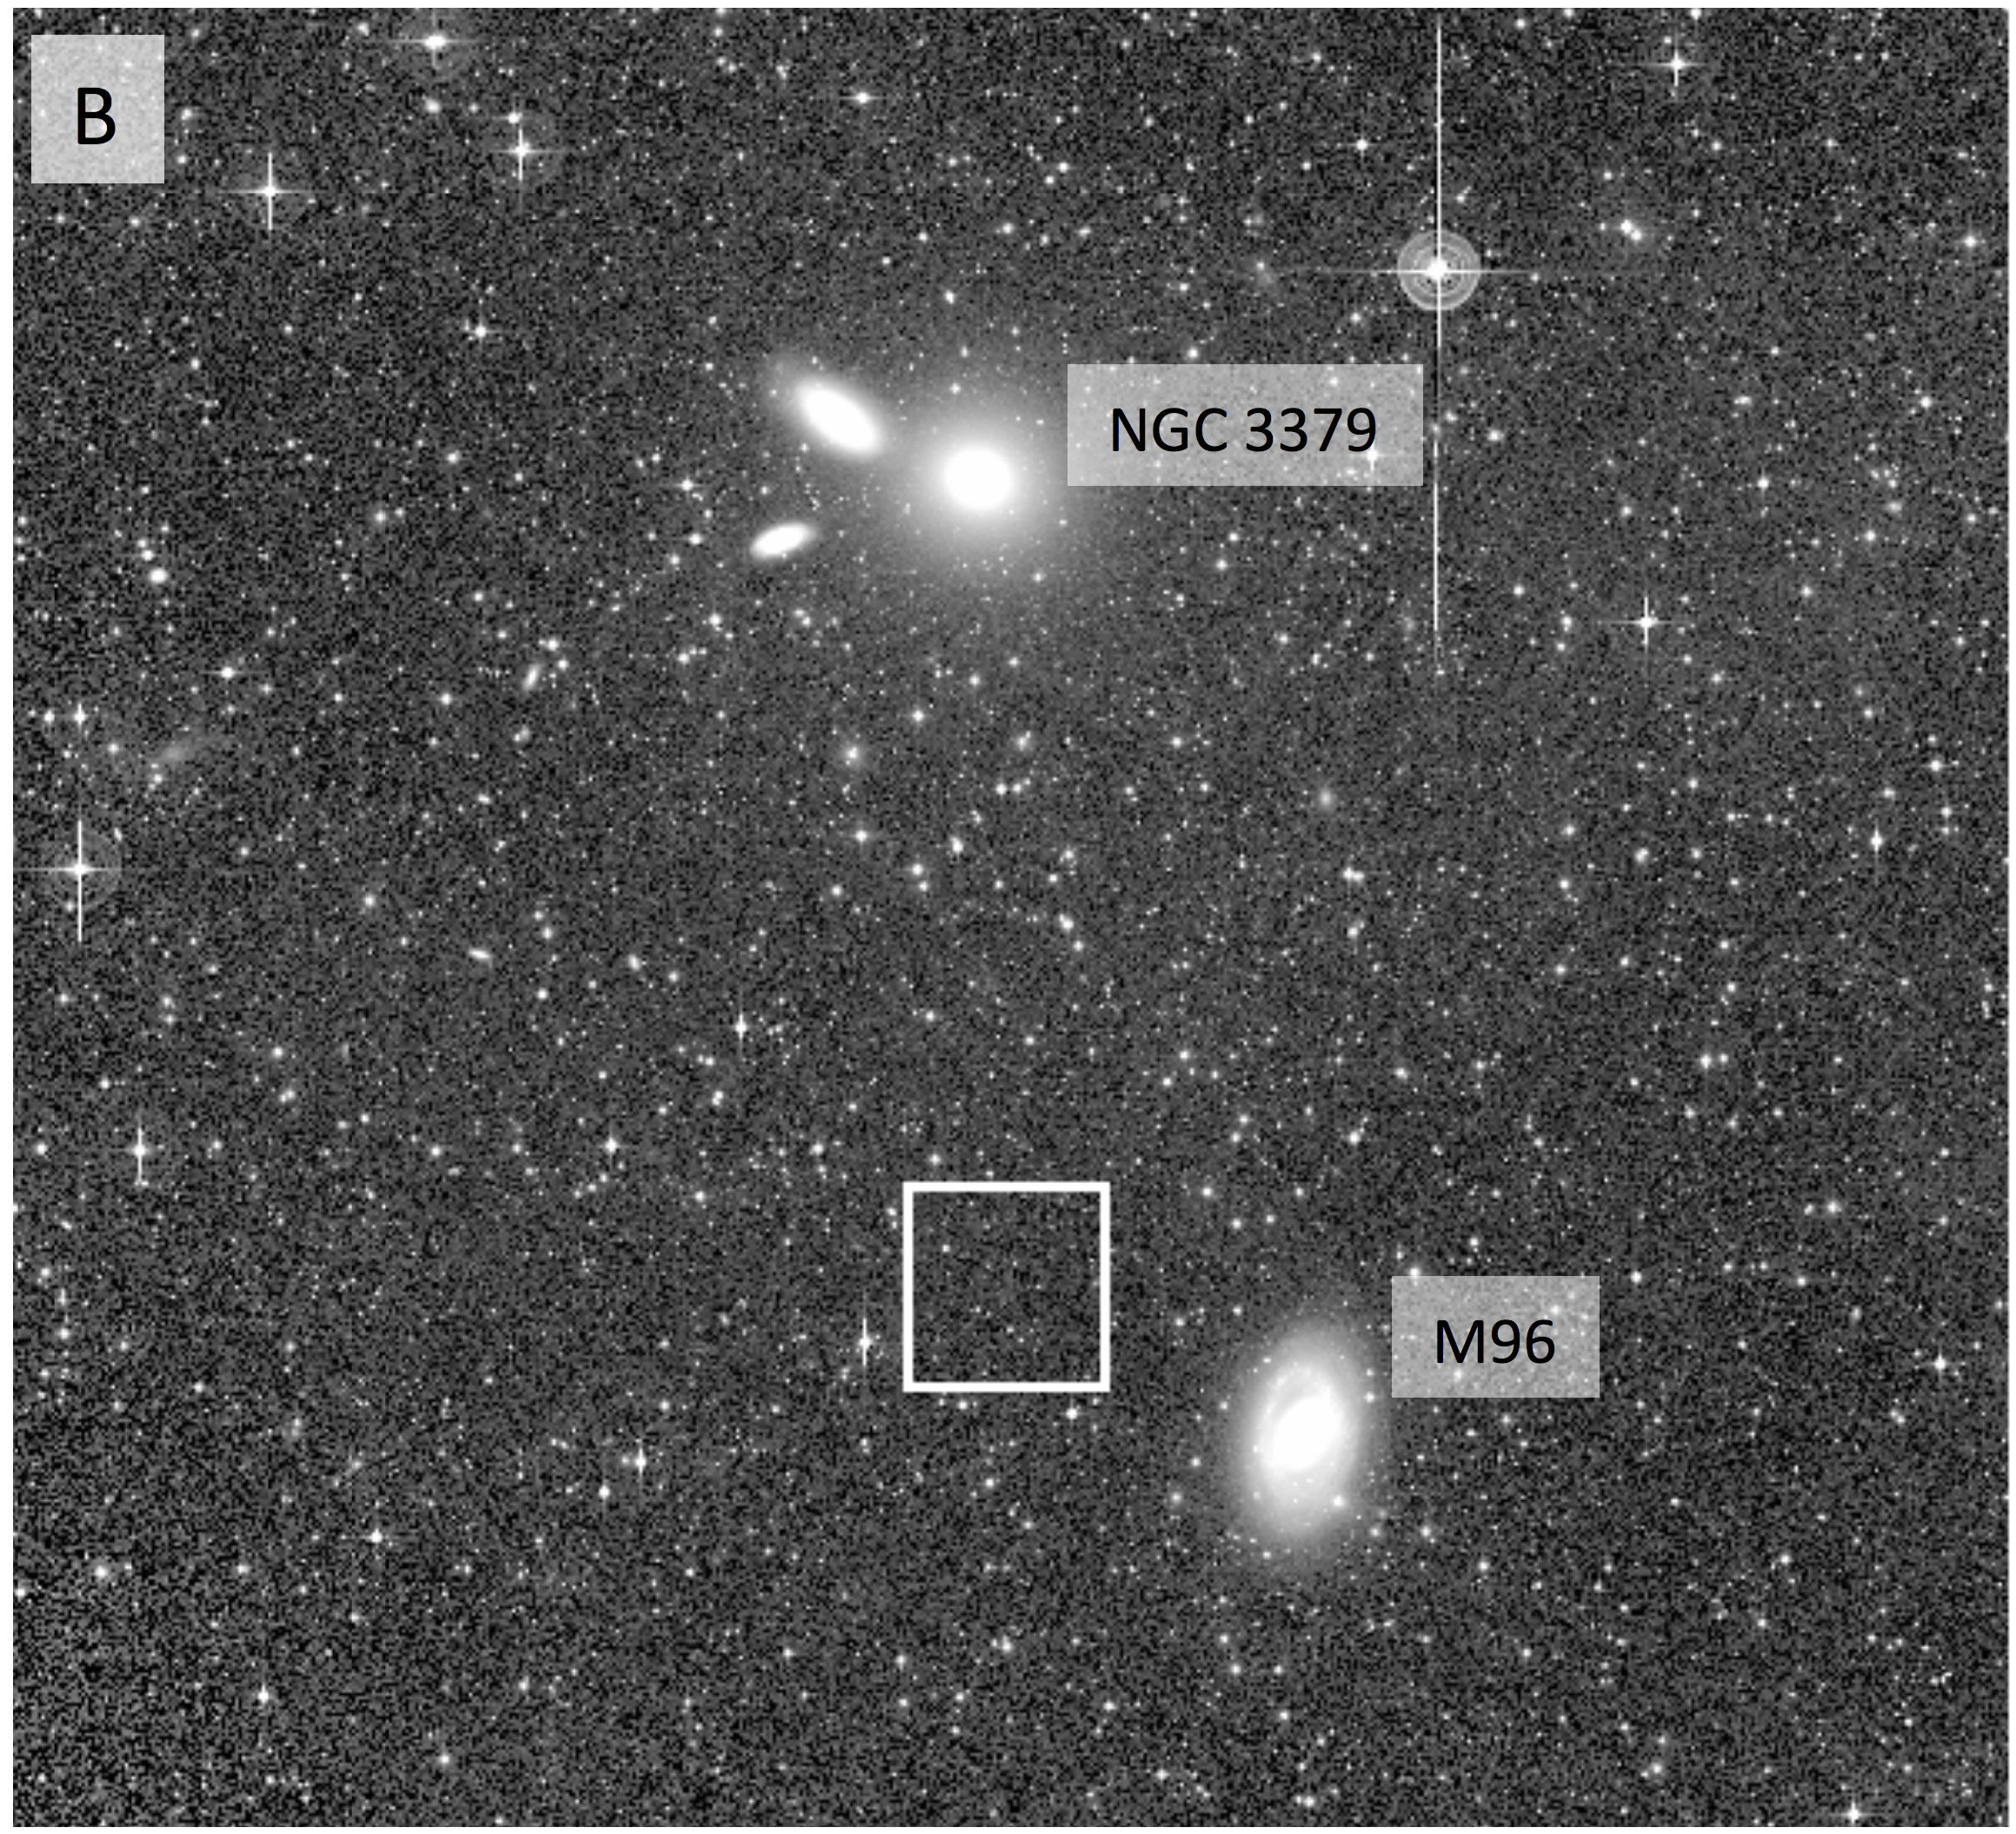 An image of the nearby Leo I galaxy group show several obvious galaxies, but also a faint smear of light (outlined) that may be a previously undiscovered galaxy. Credit: Mihos et al. 